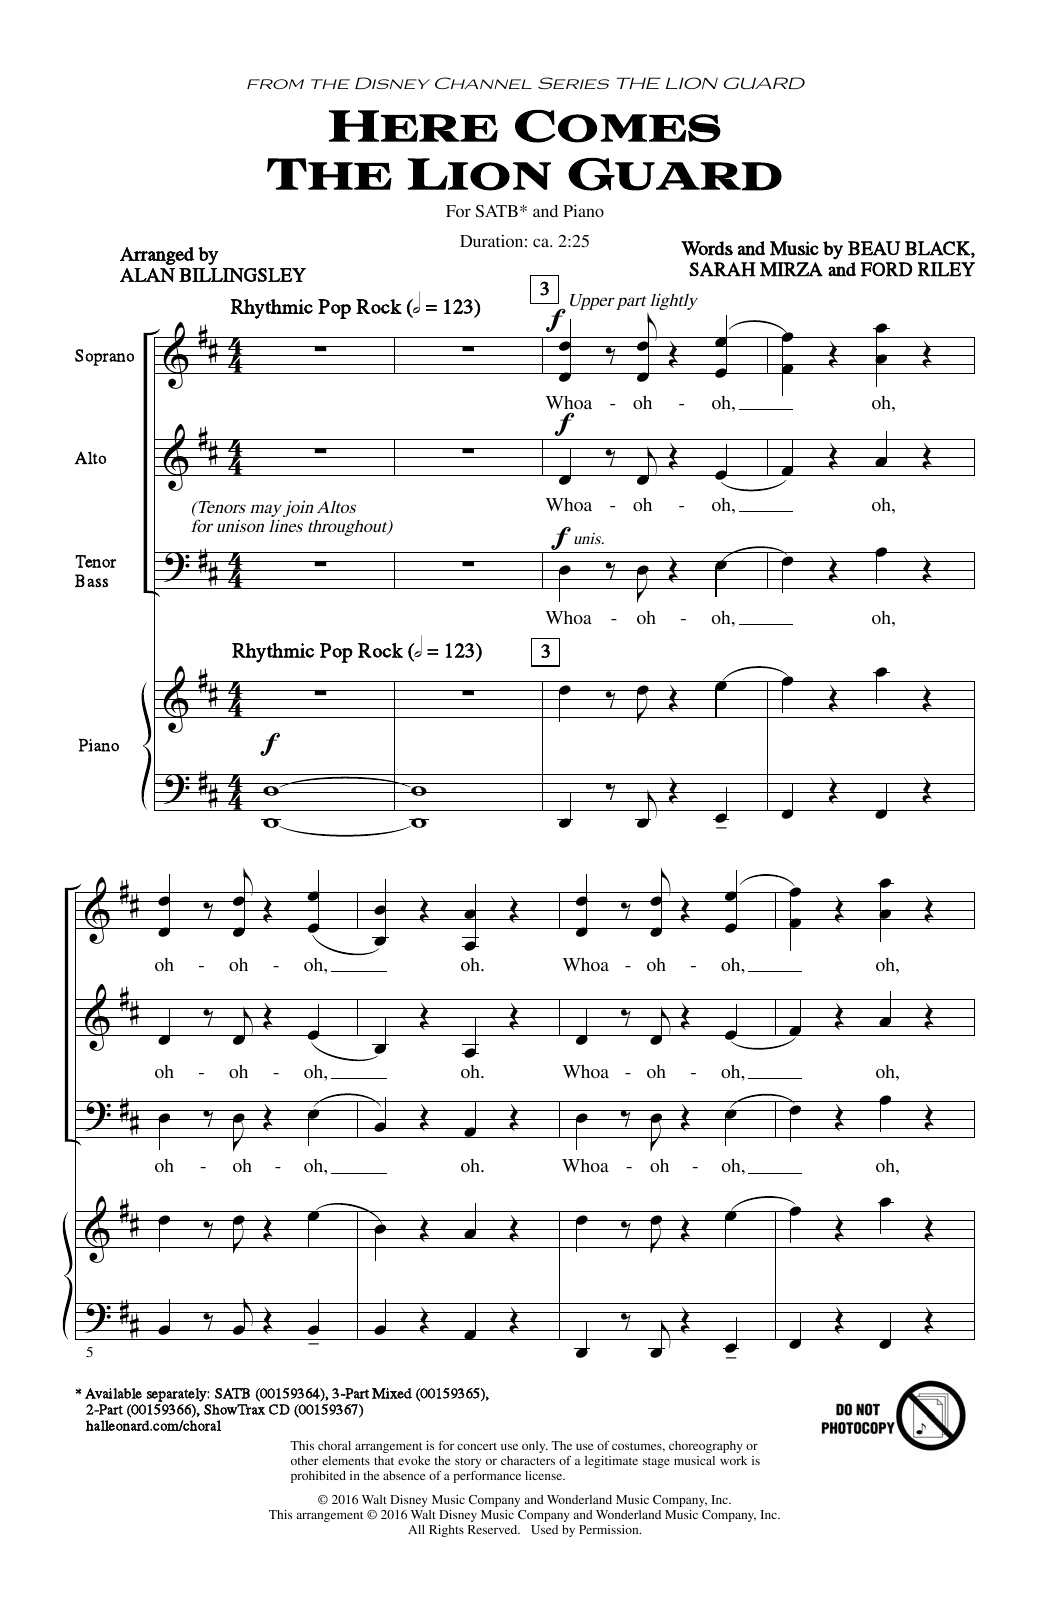 Alan Billingsley Here Comes The Lion Guard sheet music notes and chords. Download Printable PDF.